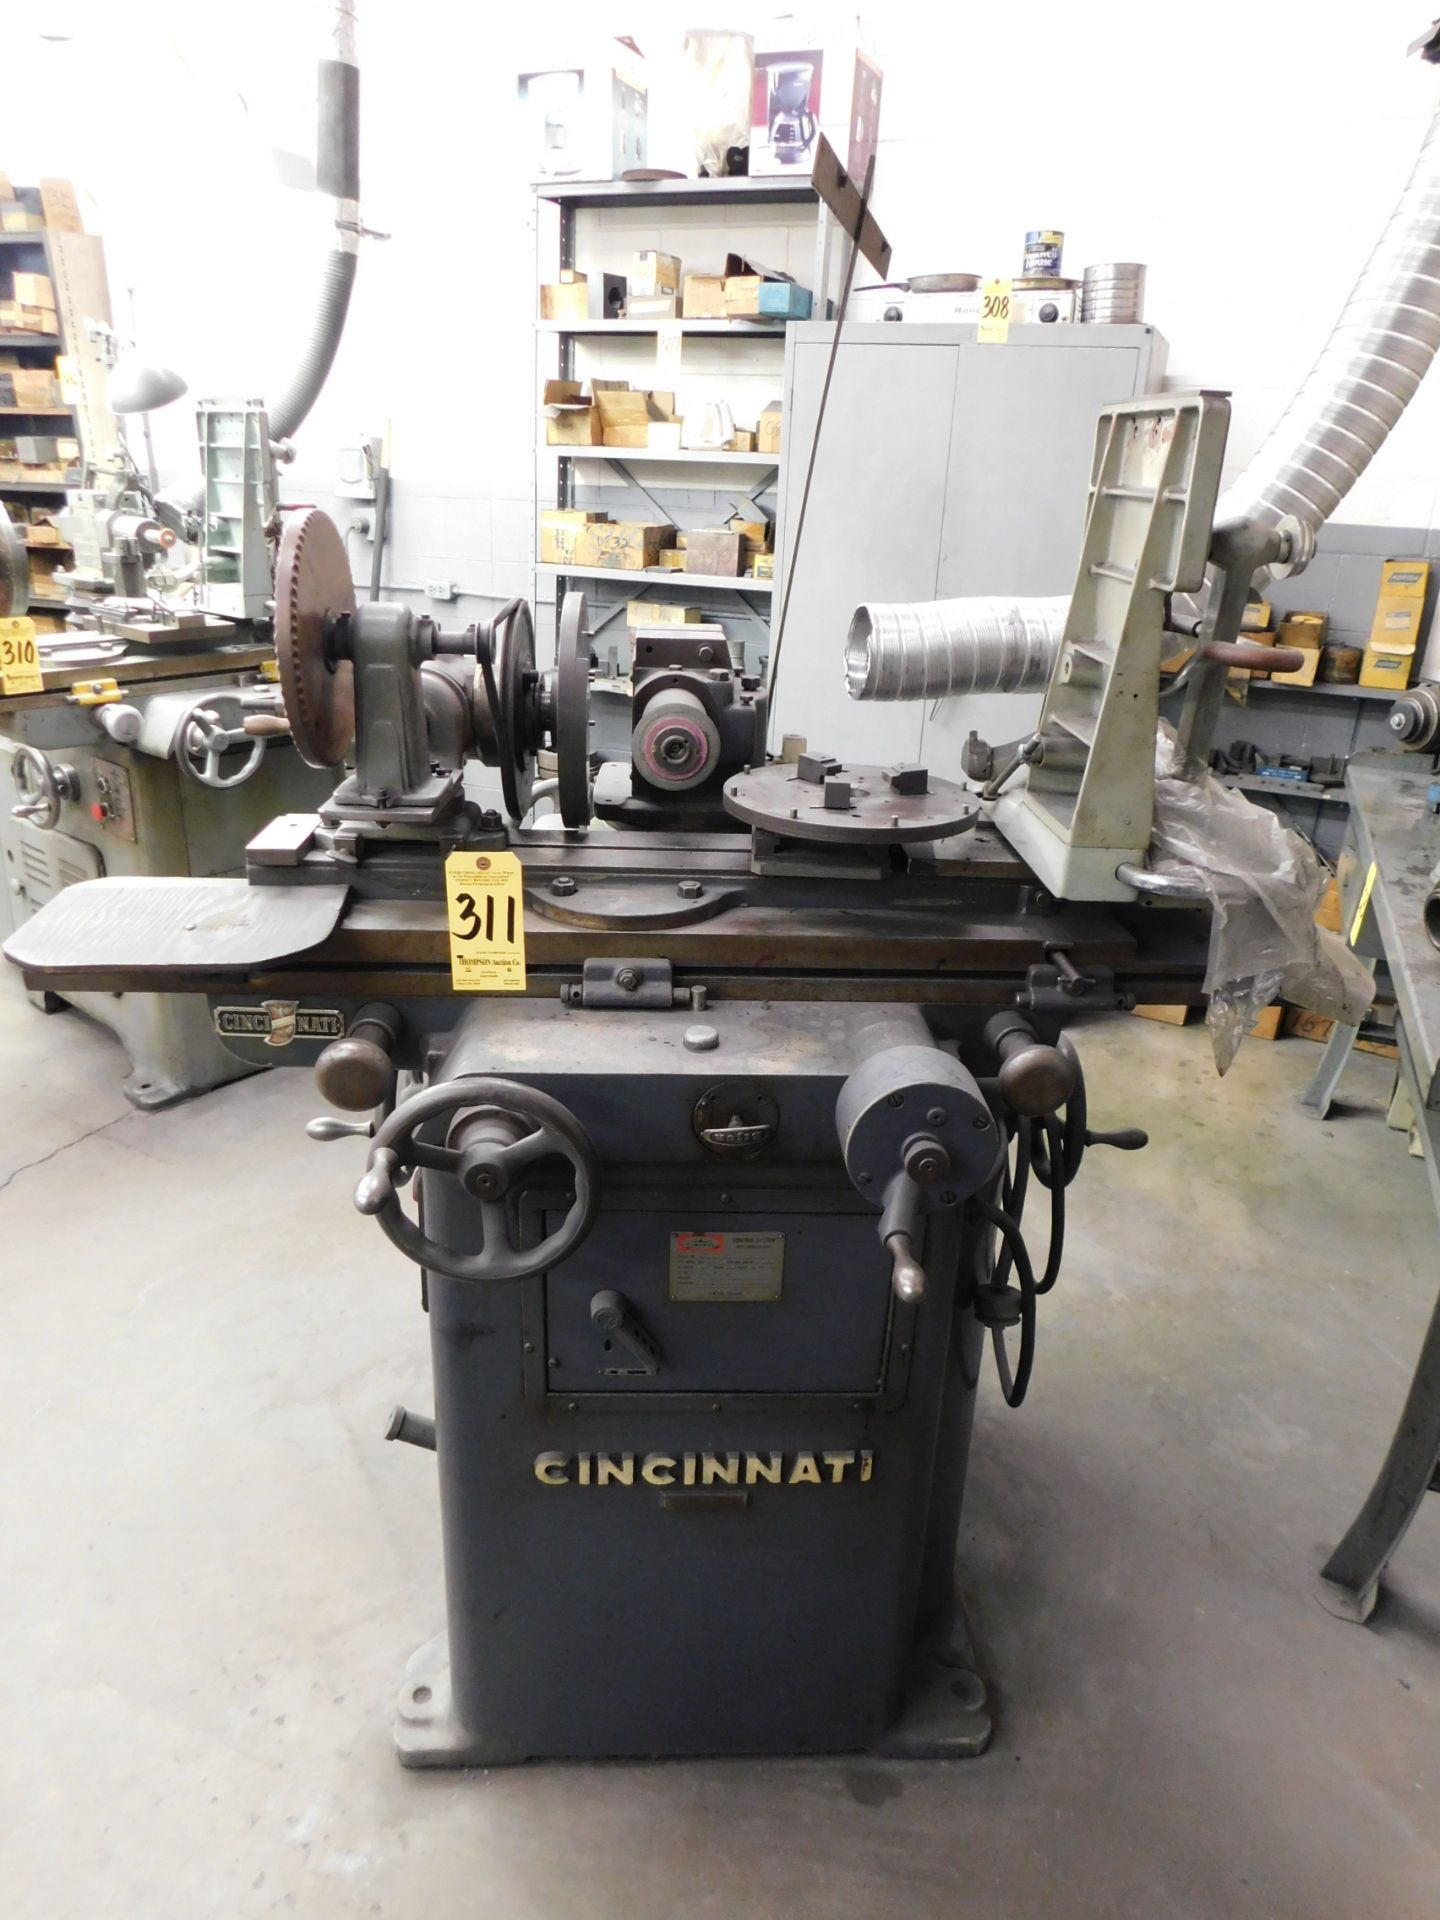 Cincinnati #2 Tool & Cutter Grinder, s/n 1D2TiV-43R, with Engis Dia Form Attachment and Hand